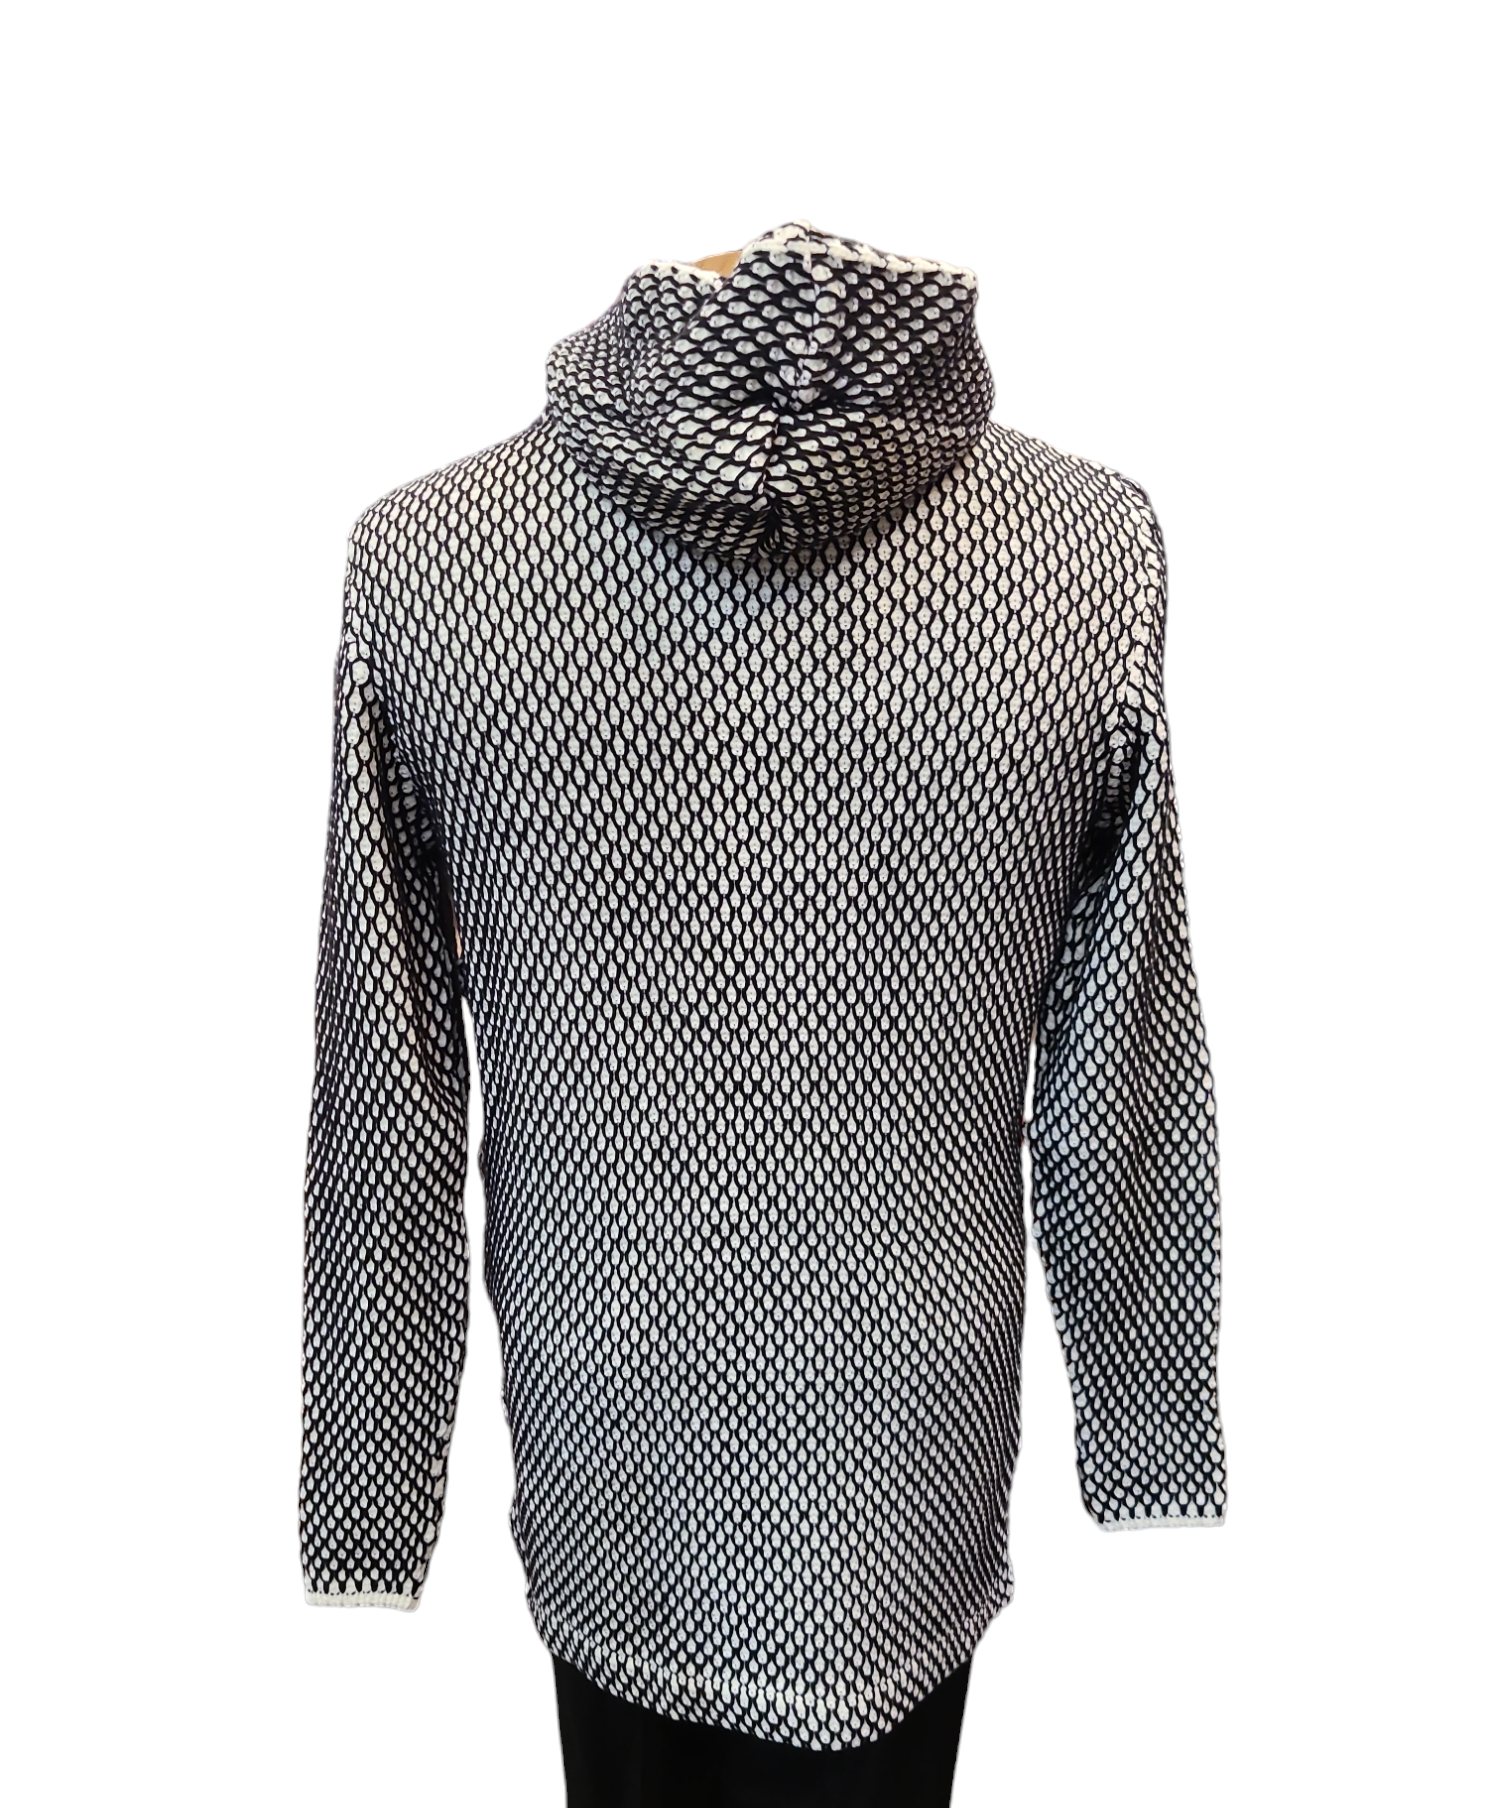 LCR Hooded 3/4 length Sweater